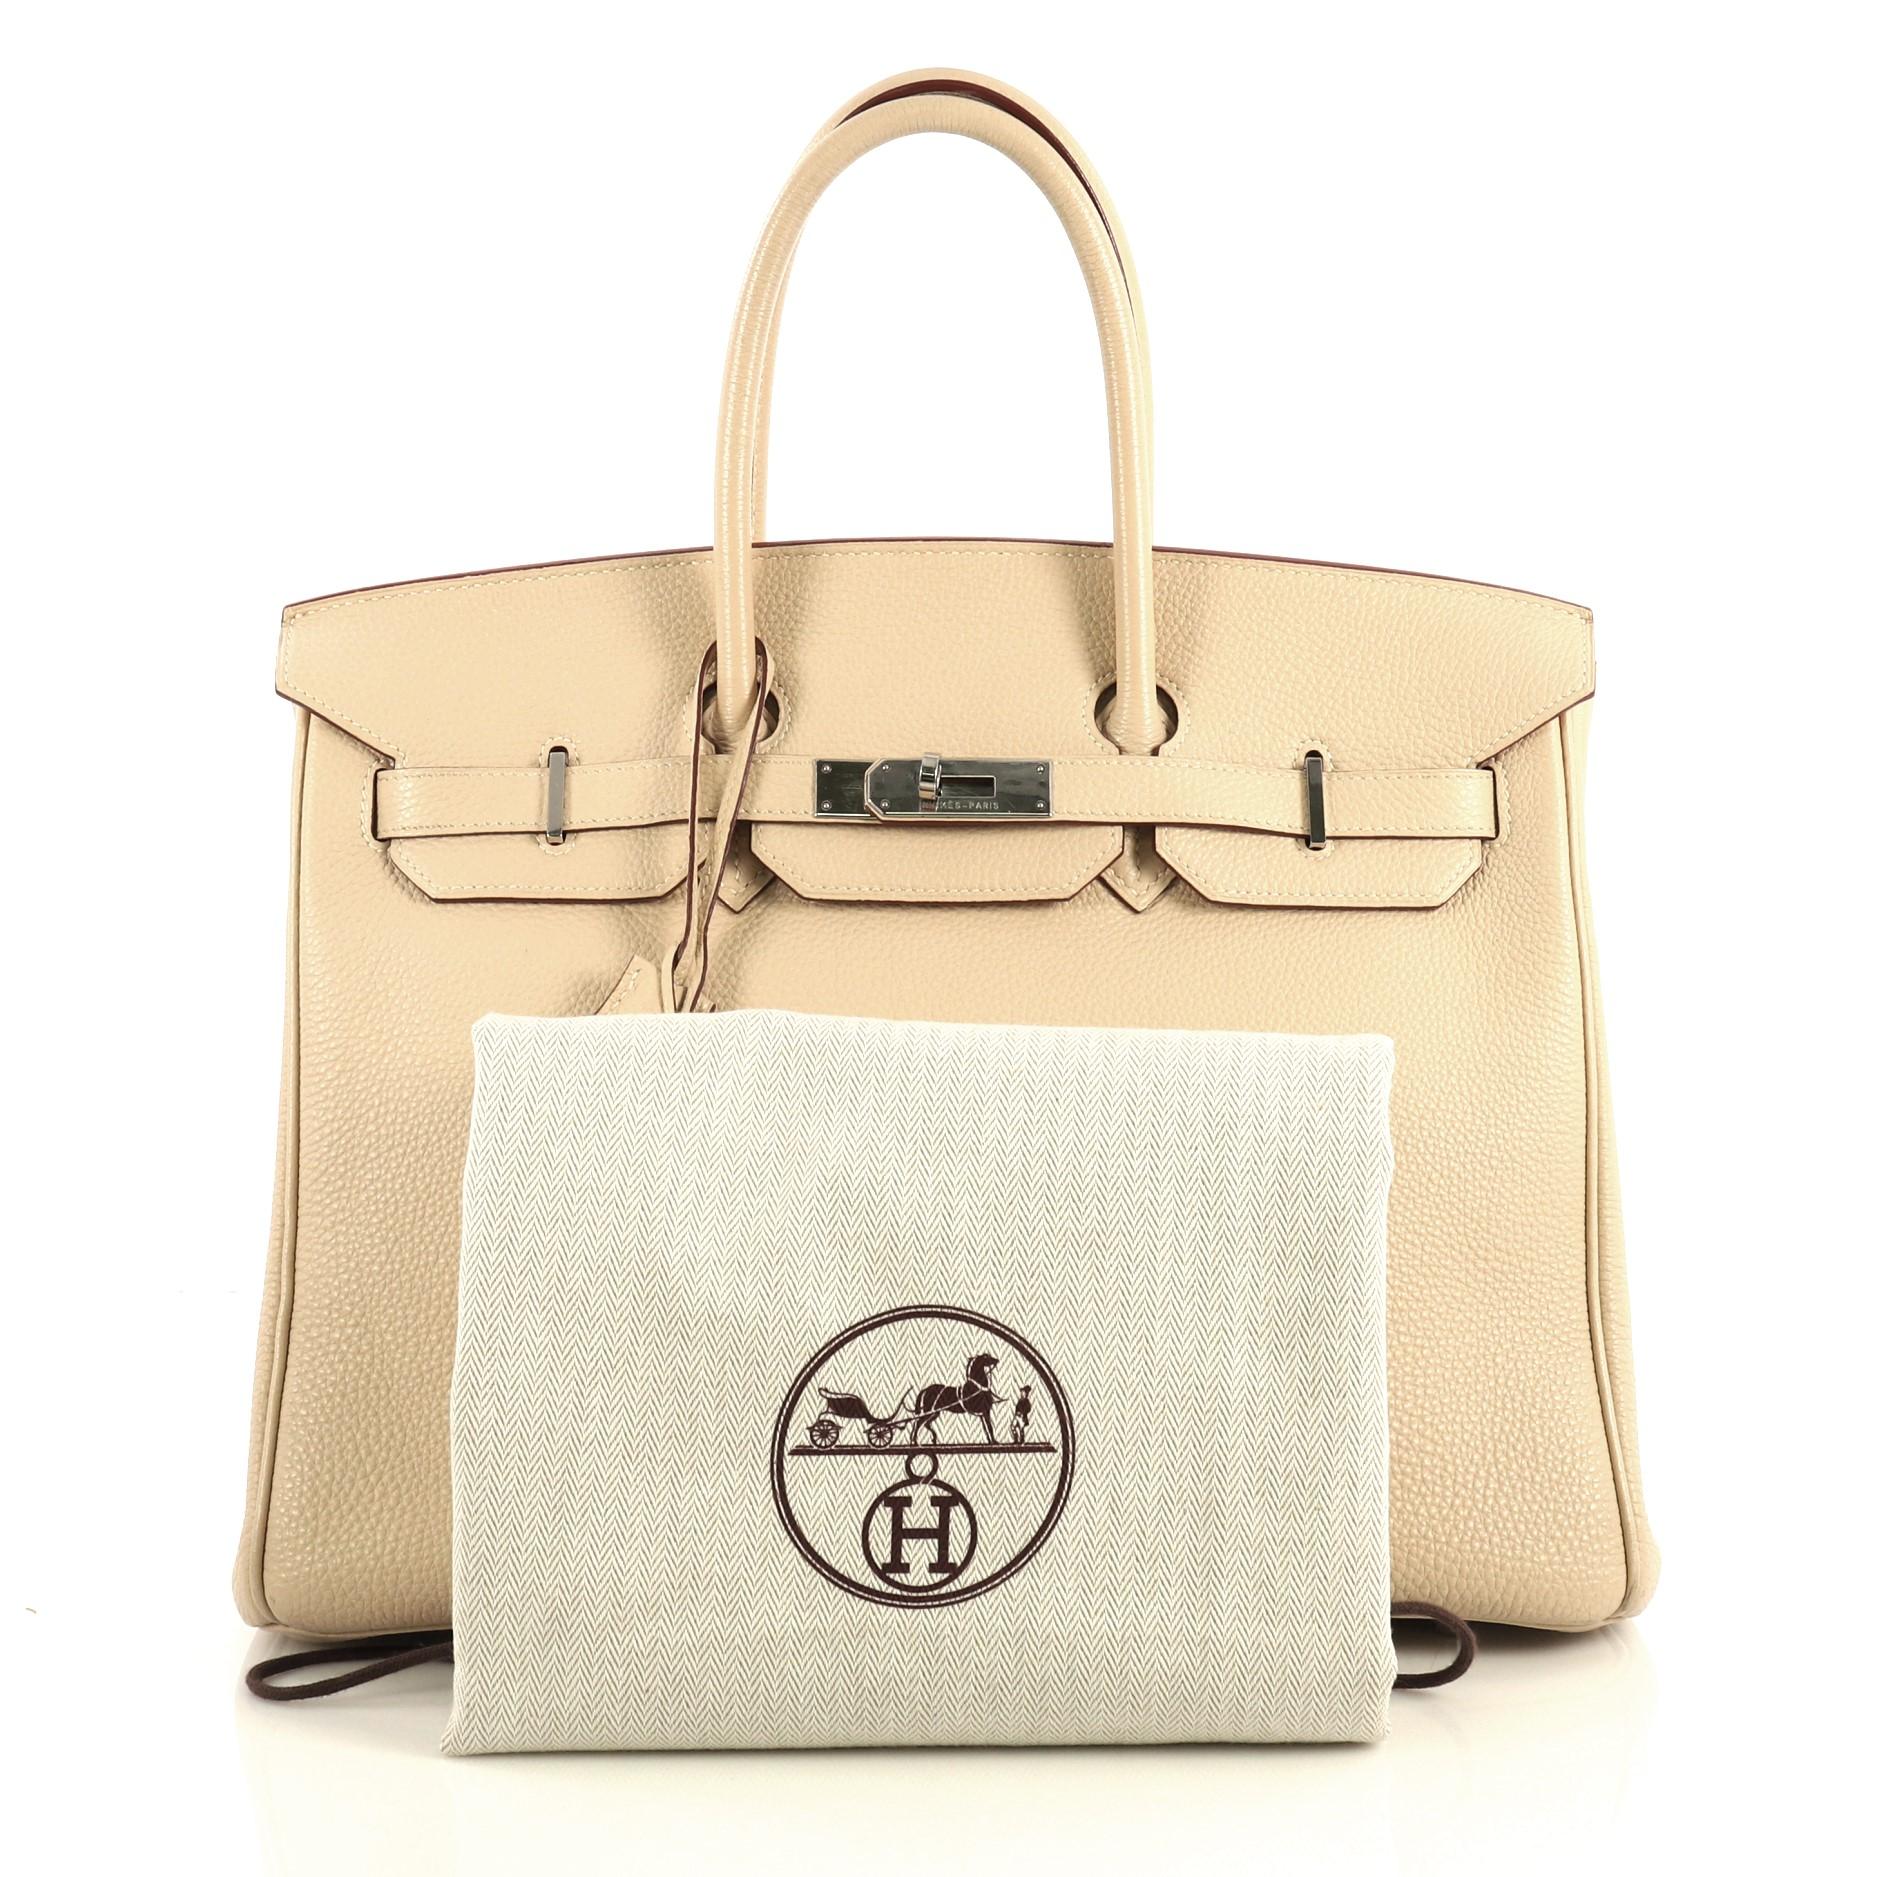 This Hermes Birkin Handbag Parchemin Togo with Palladium Hardware 35, crafted in Parchemin neutral Togo leather, features dual rolled top handles, frontal flap, and palladium hardware. Its turn-lock closure opens to a Parchemin neutral Chevre